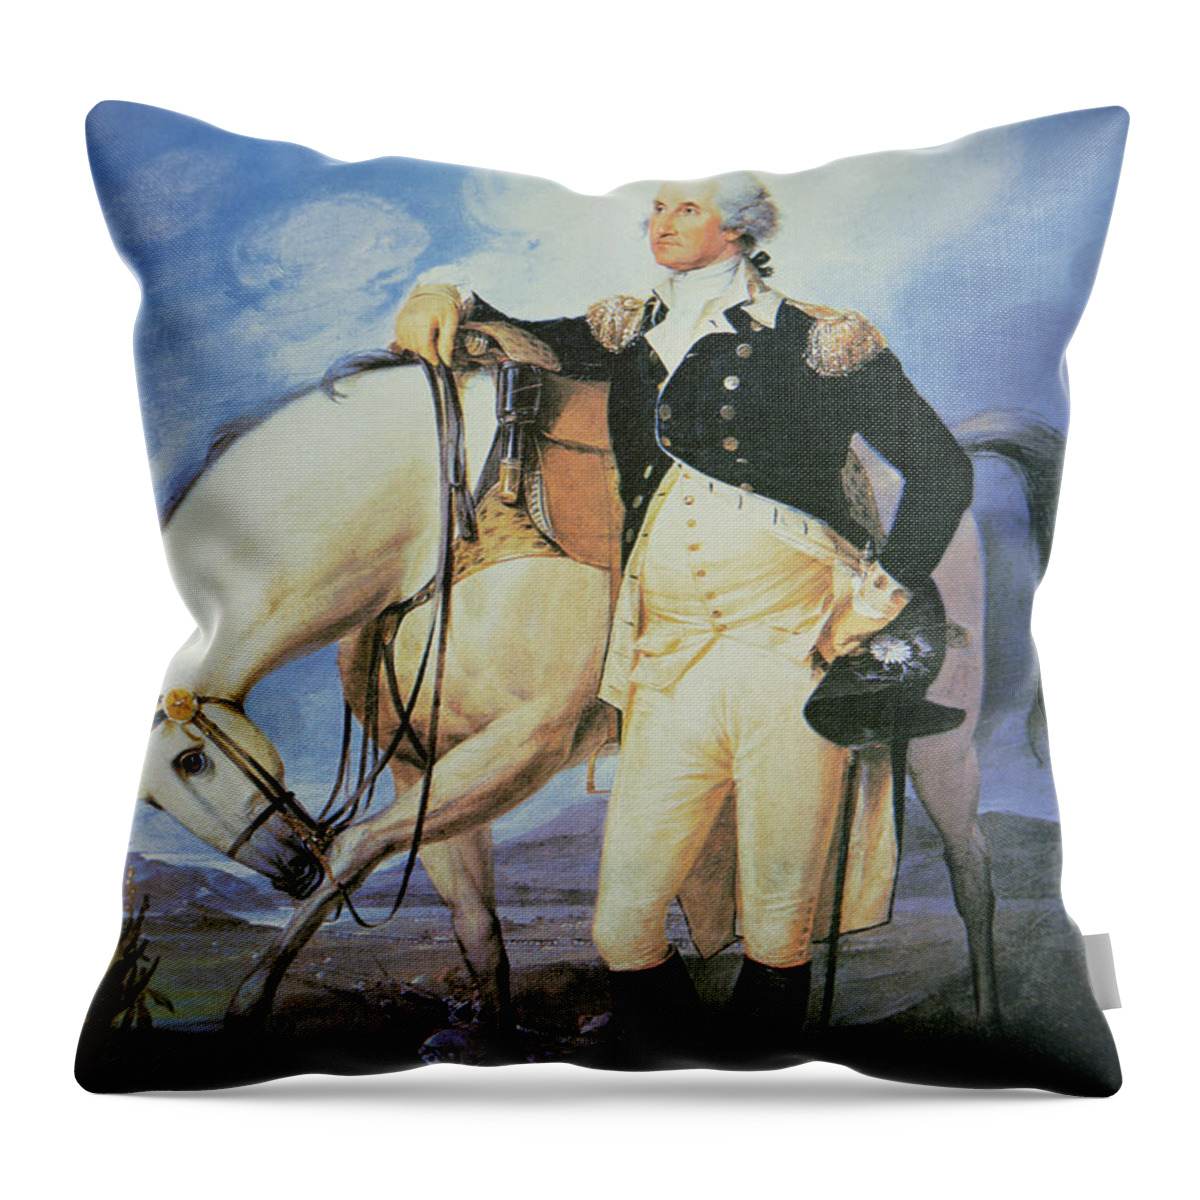 Male; Portrait; Full Length; Tricorn Hat; United States; Politician; Military; Horse; Battle; Battlefield; Hilltop; Officer; Soldier; American; 1st Throw Pillow featuring the painting George Washington by John Trumbull